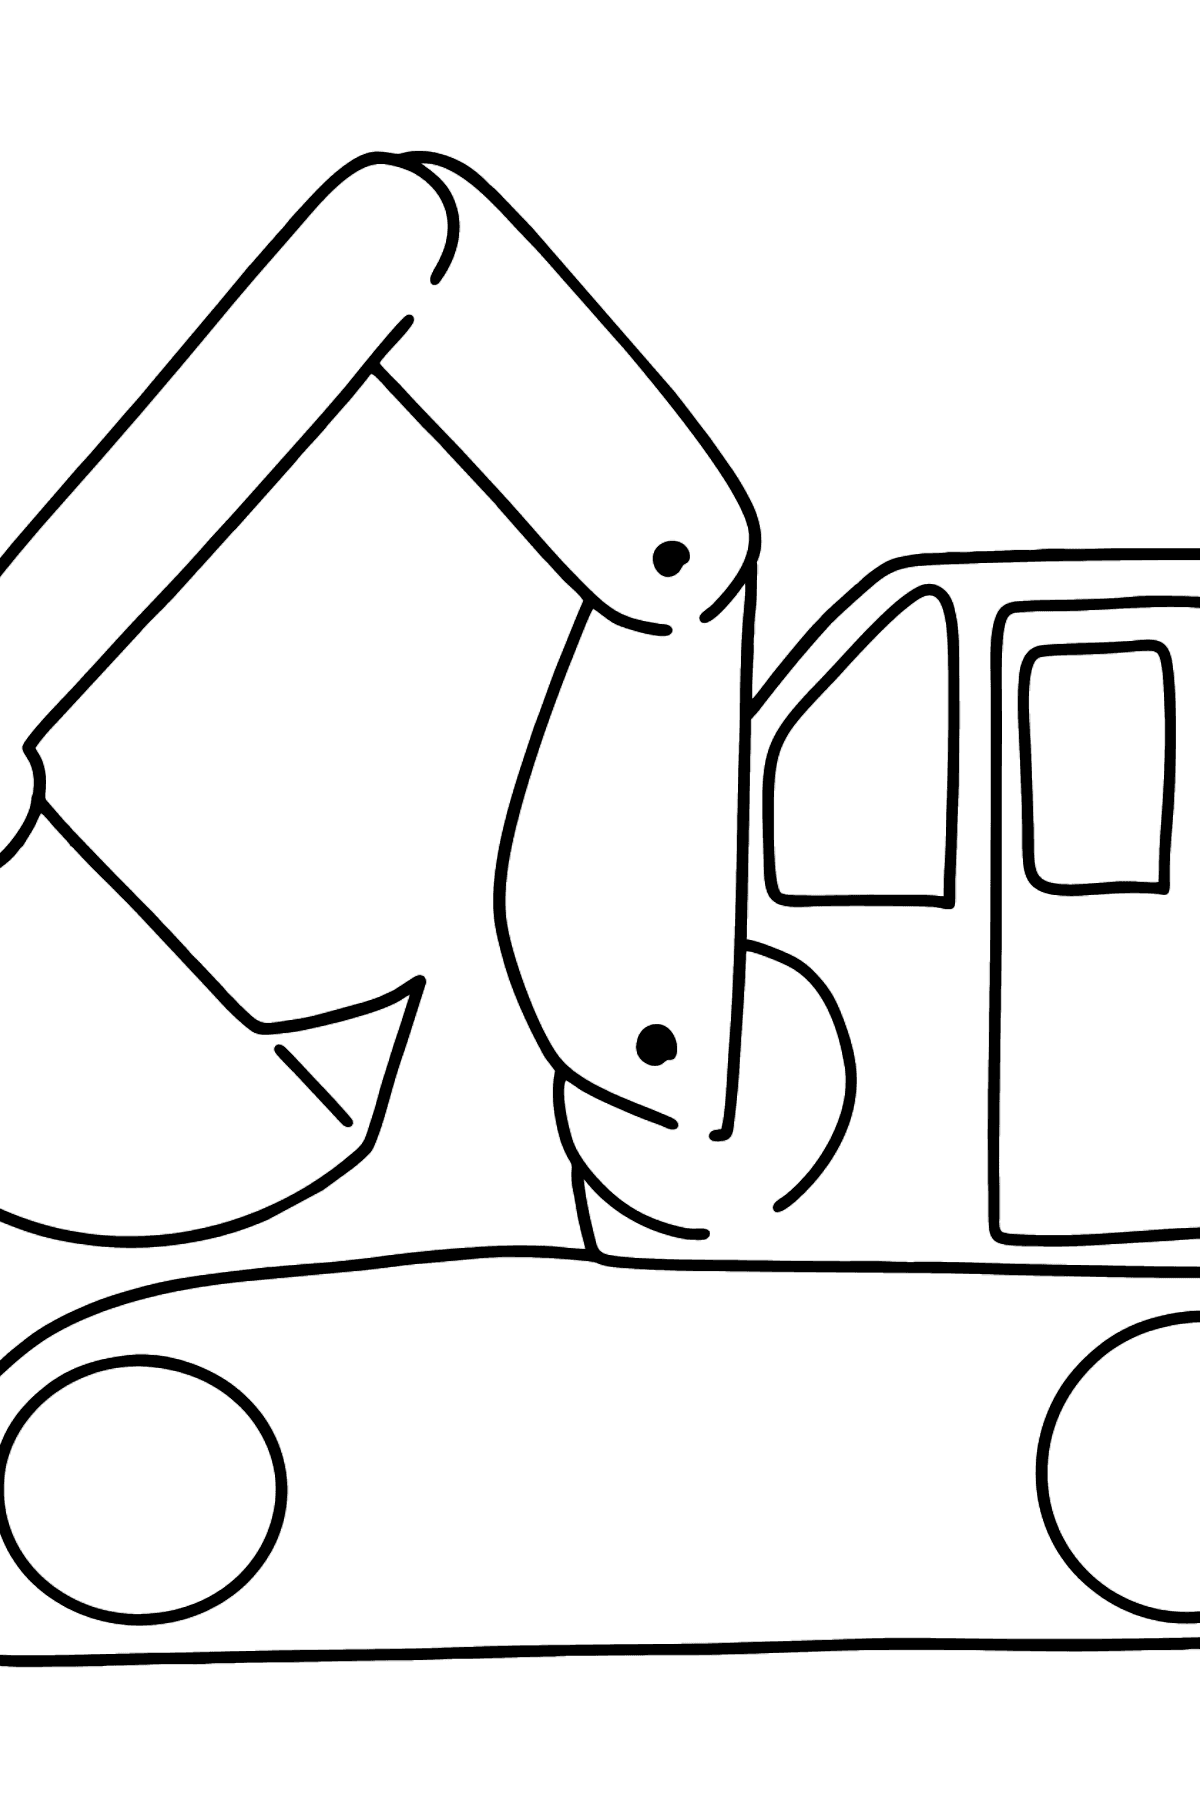 Tractor excavator coloring pages for kids - Coloring Pages for Kids